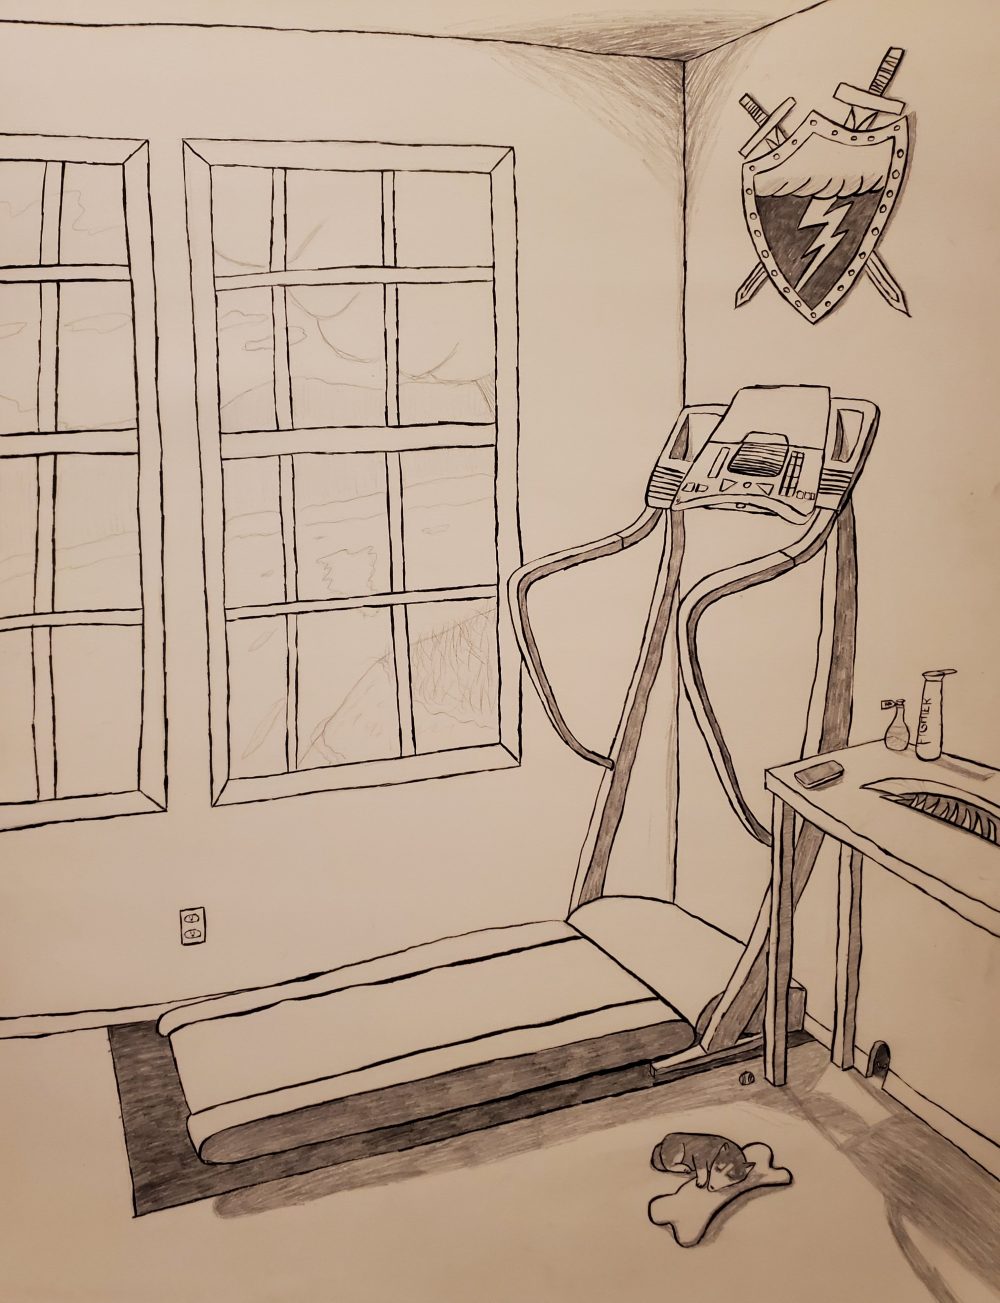 A black and white drawing showing a room with a treadmill and fantasy objects with a fantasy landscape outside the window.